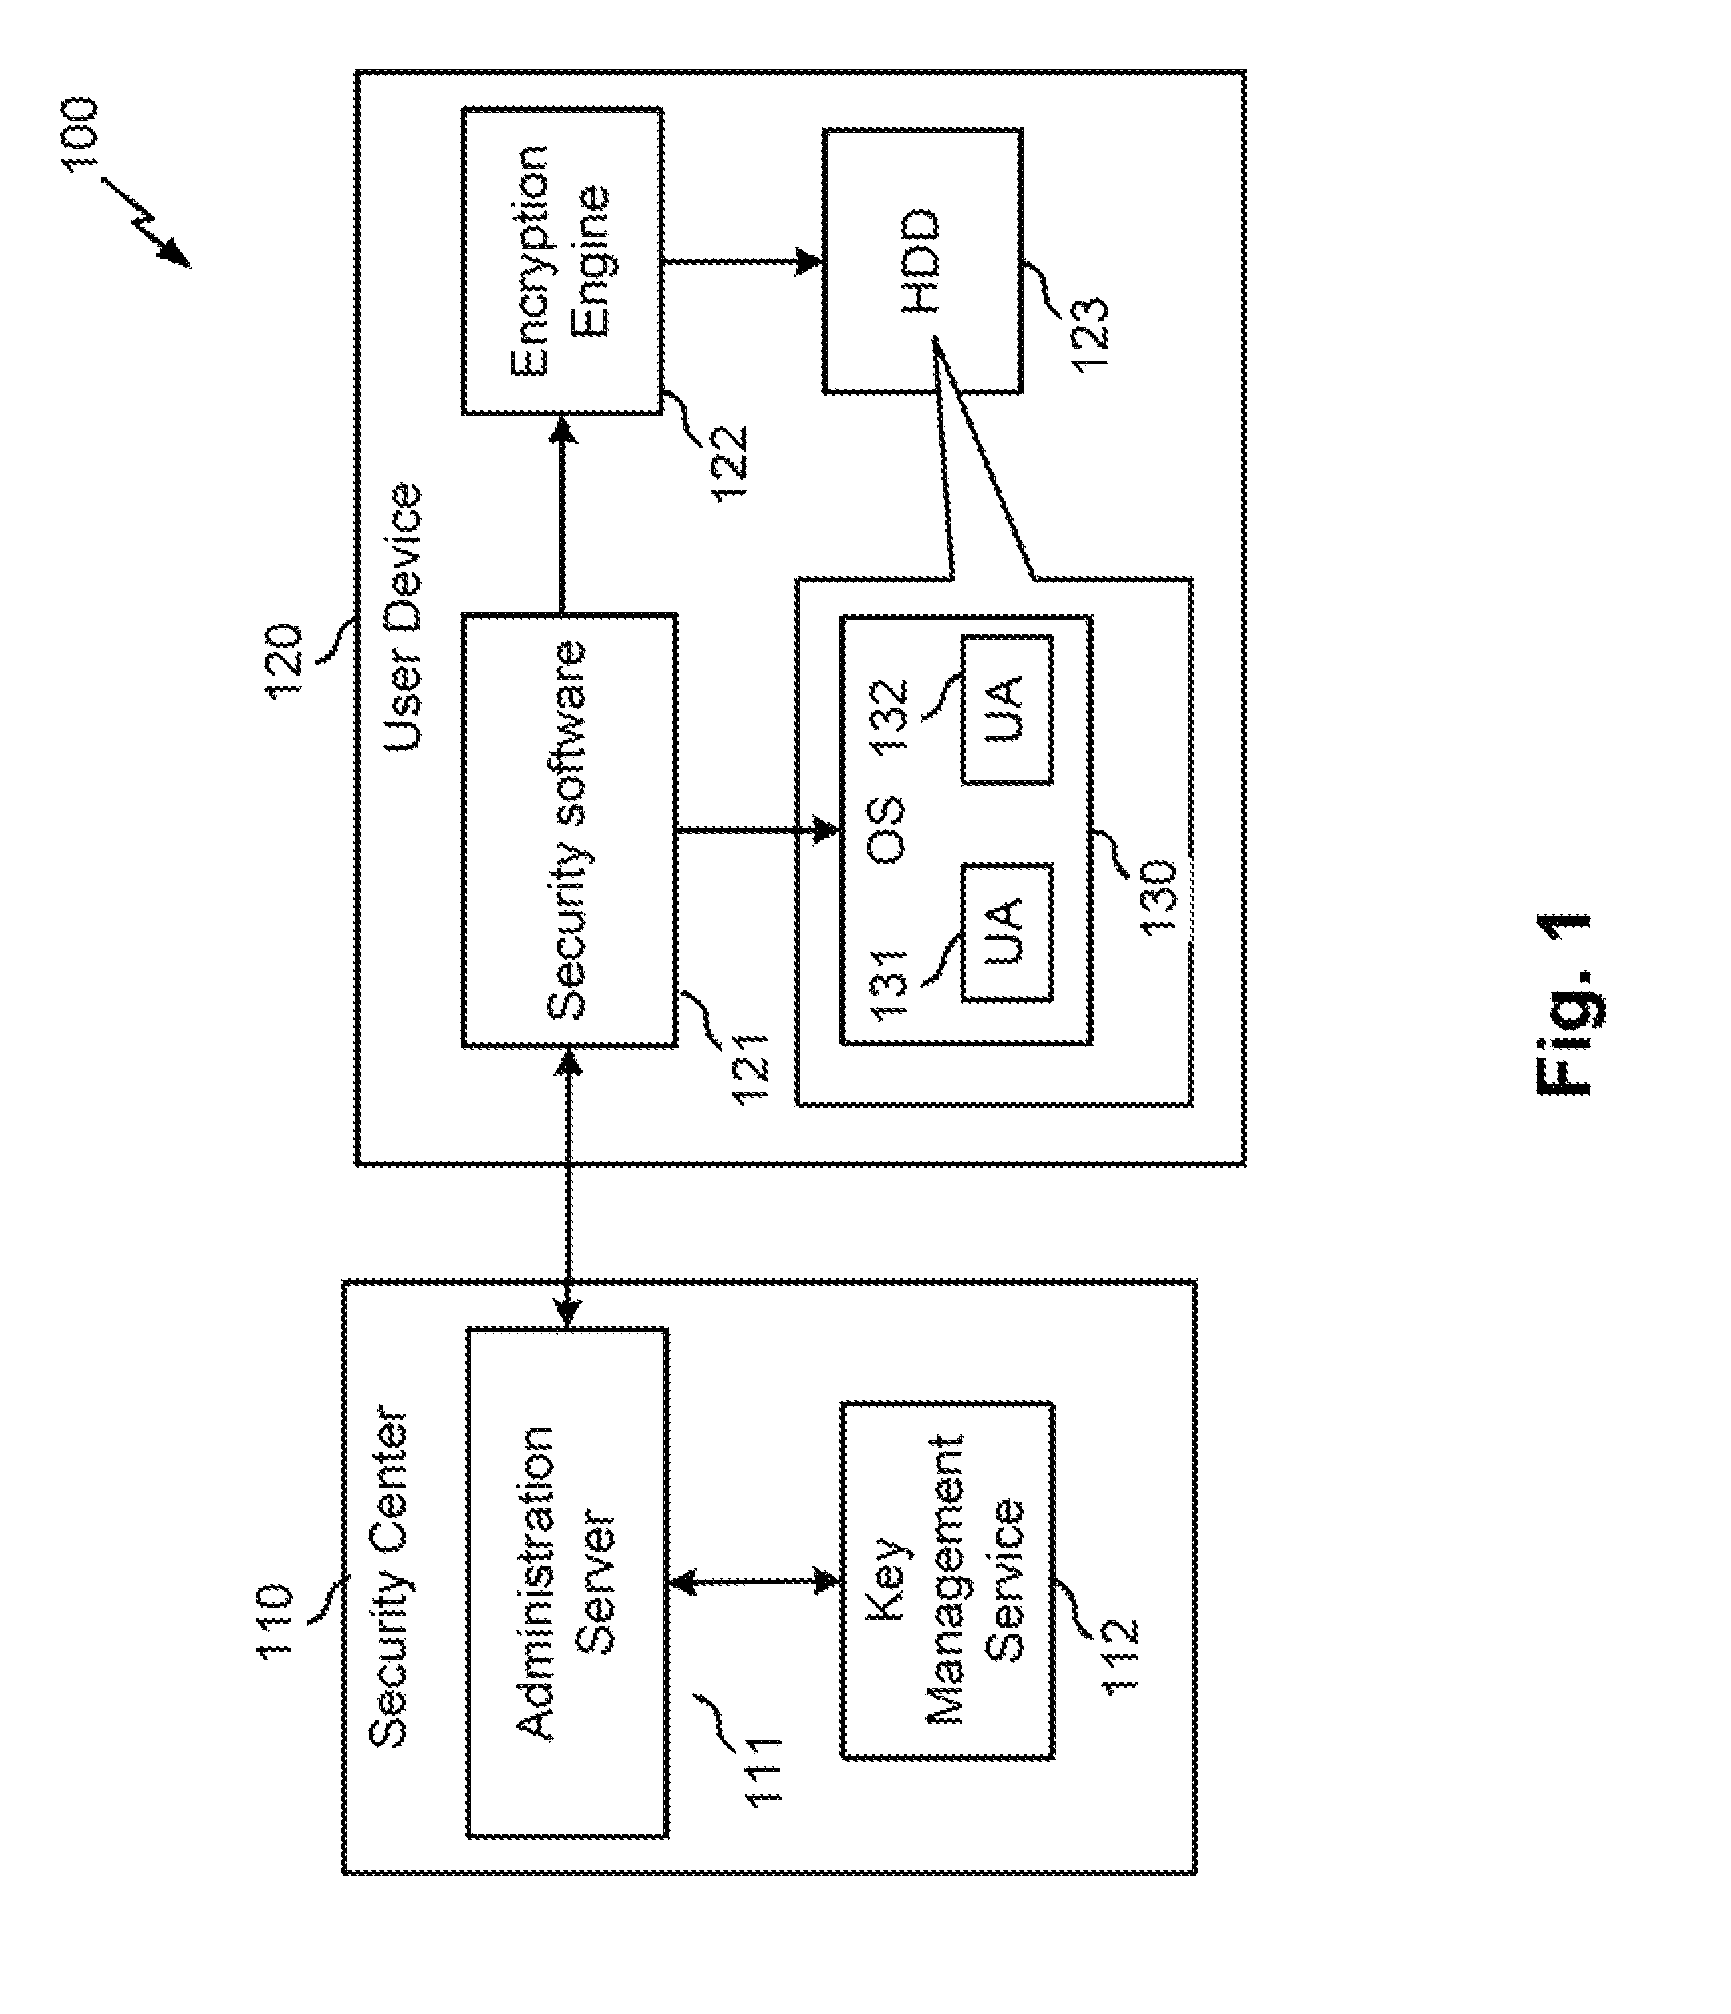 System and method for controlling user access to encrypted data